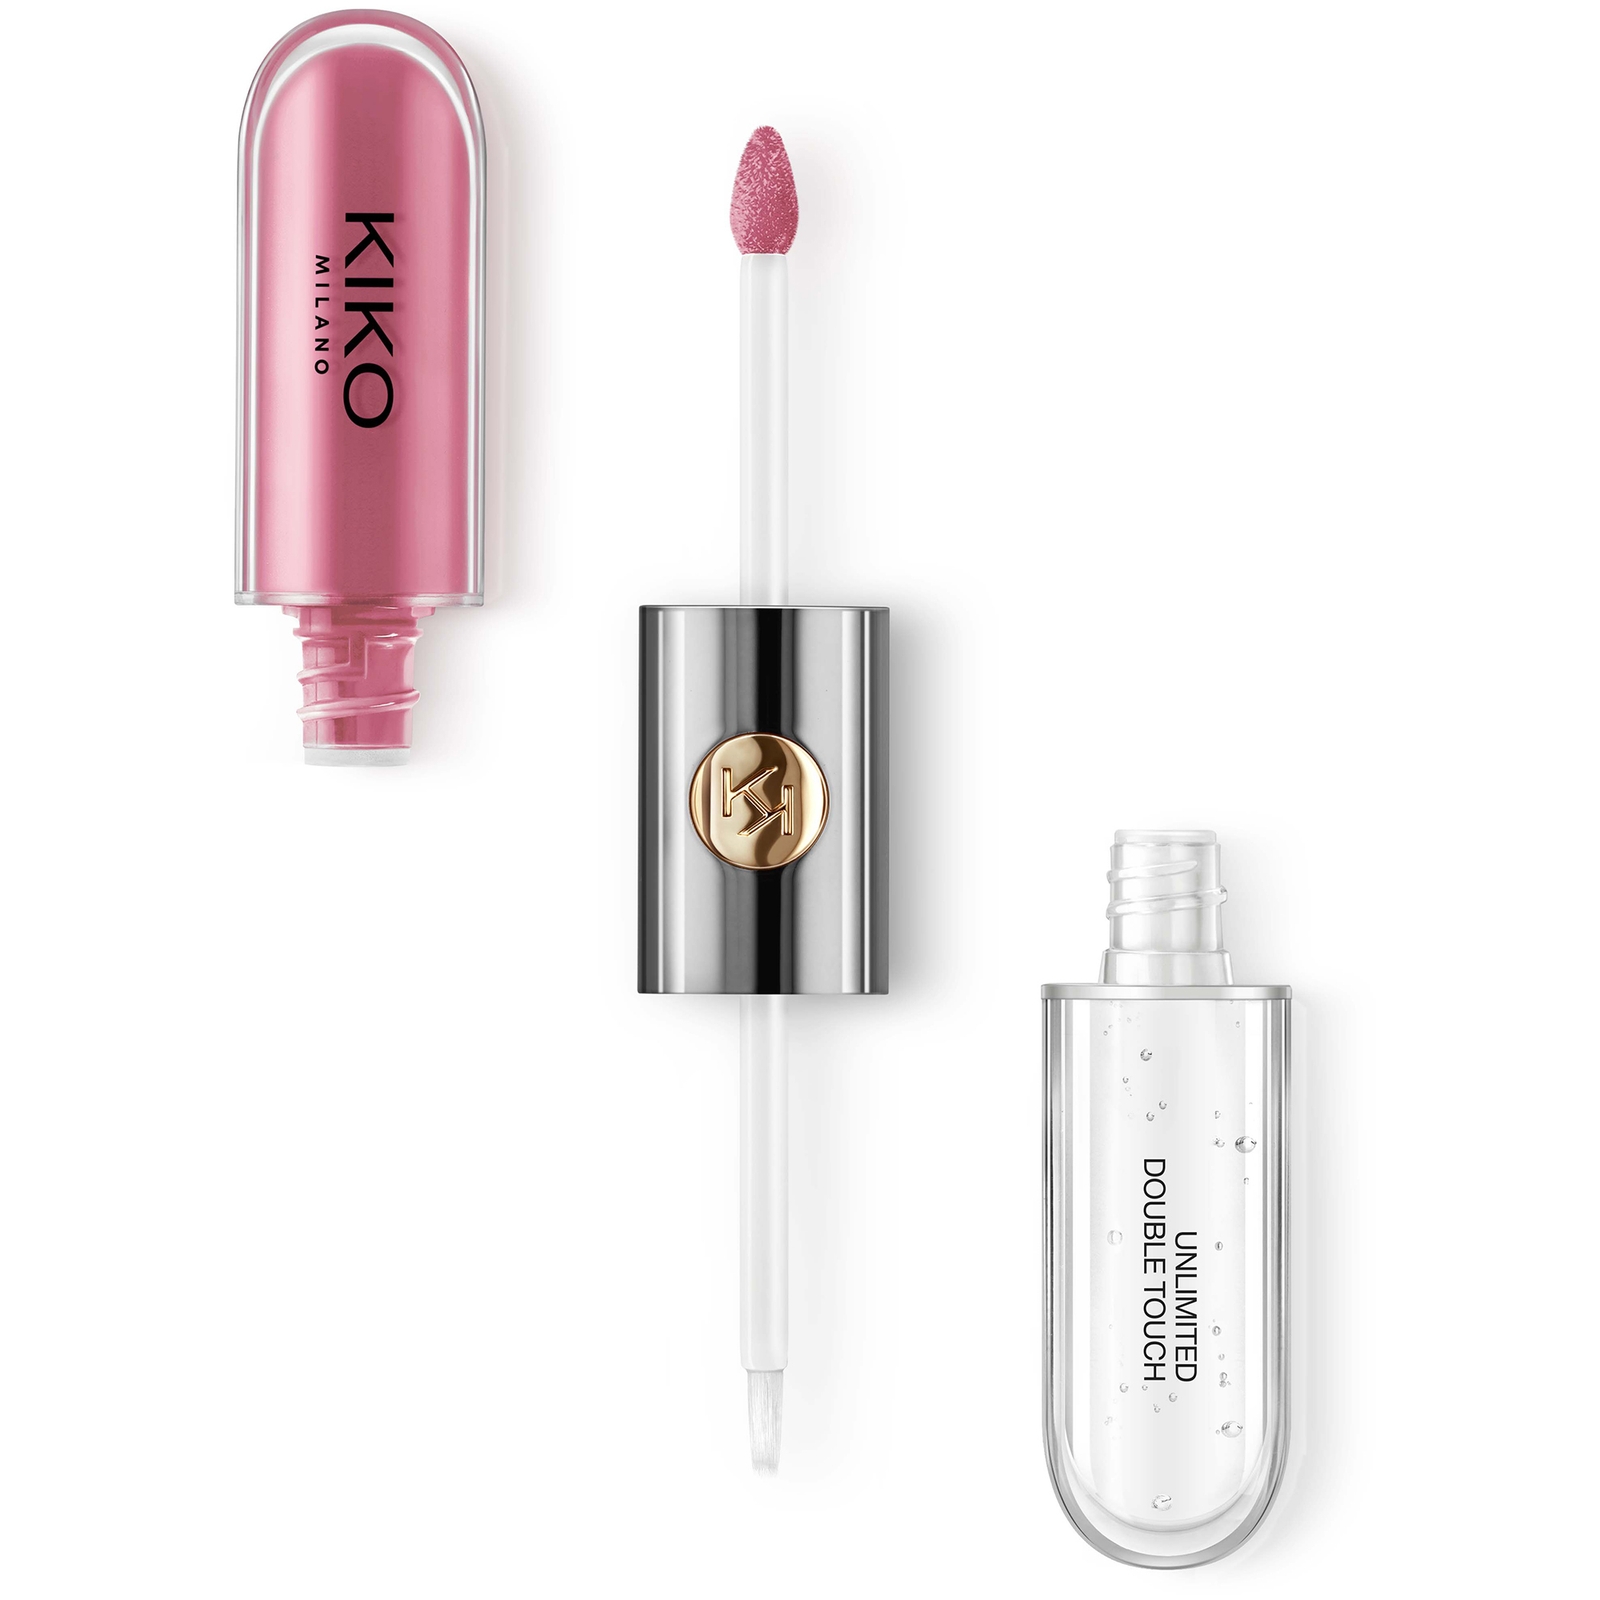 KIKO Milano Unlimited Double Touch 6ml (Various Shades) - 119 Rhododendron Pink